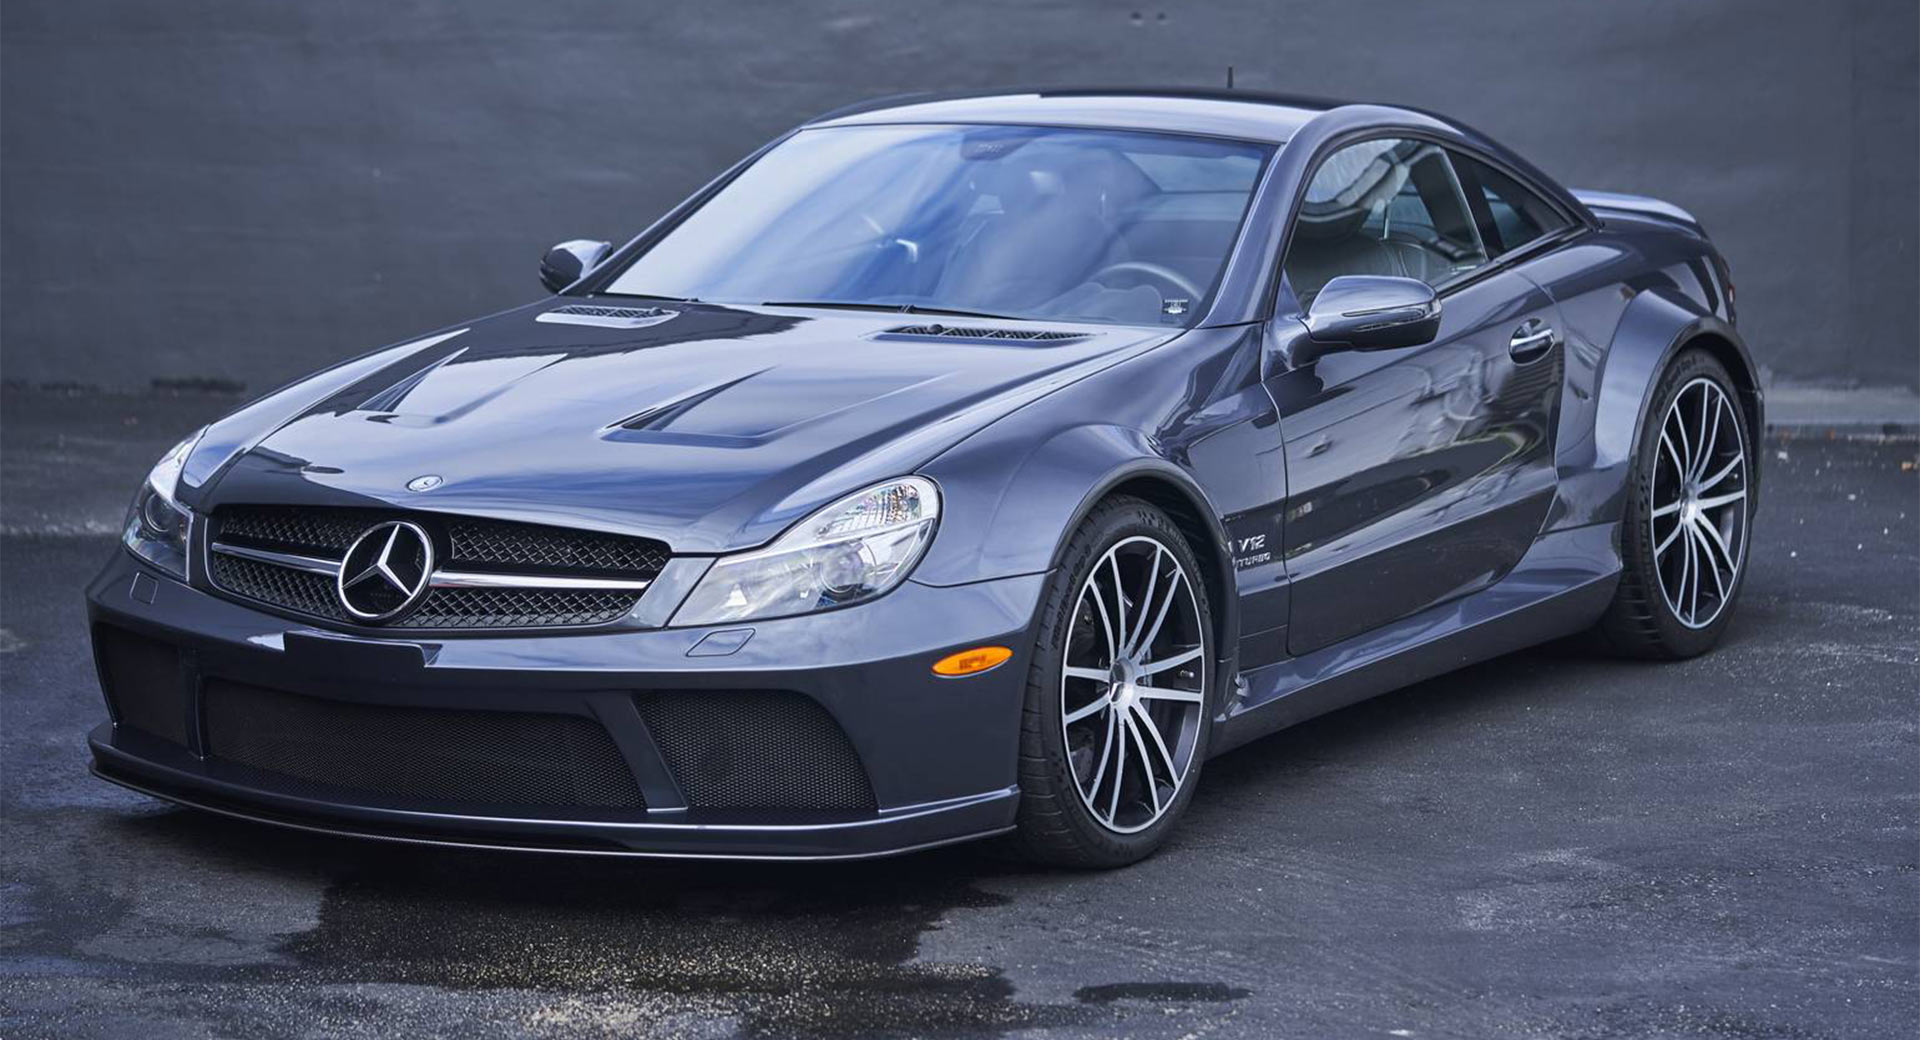 The Mercedes-Benz SL65 AMG Black Is An Absolute Brute Of Car | Carscoops